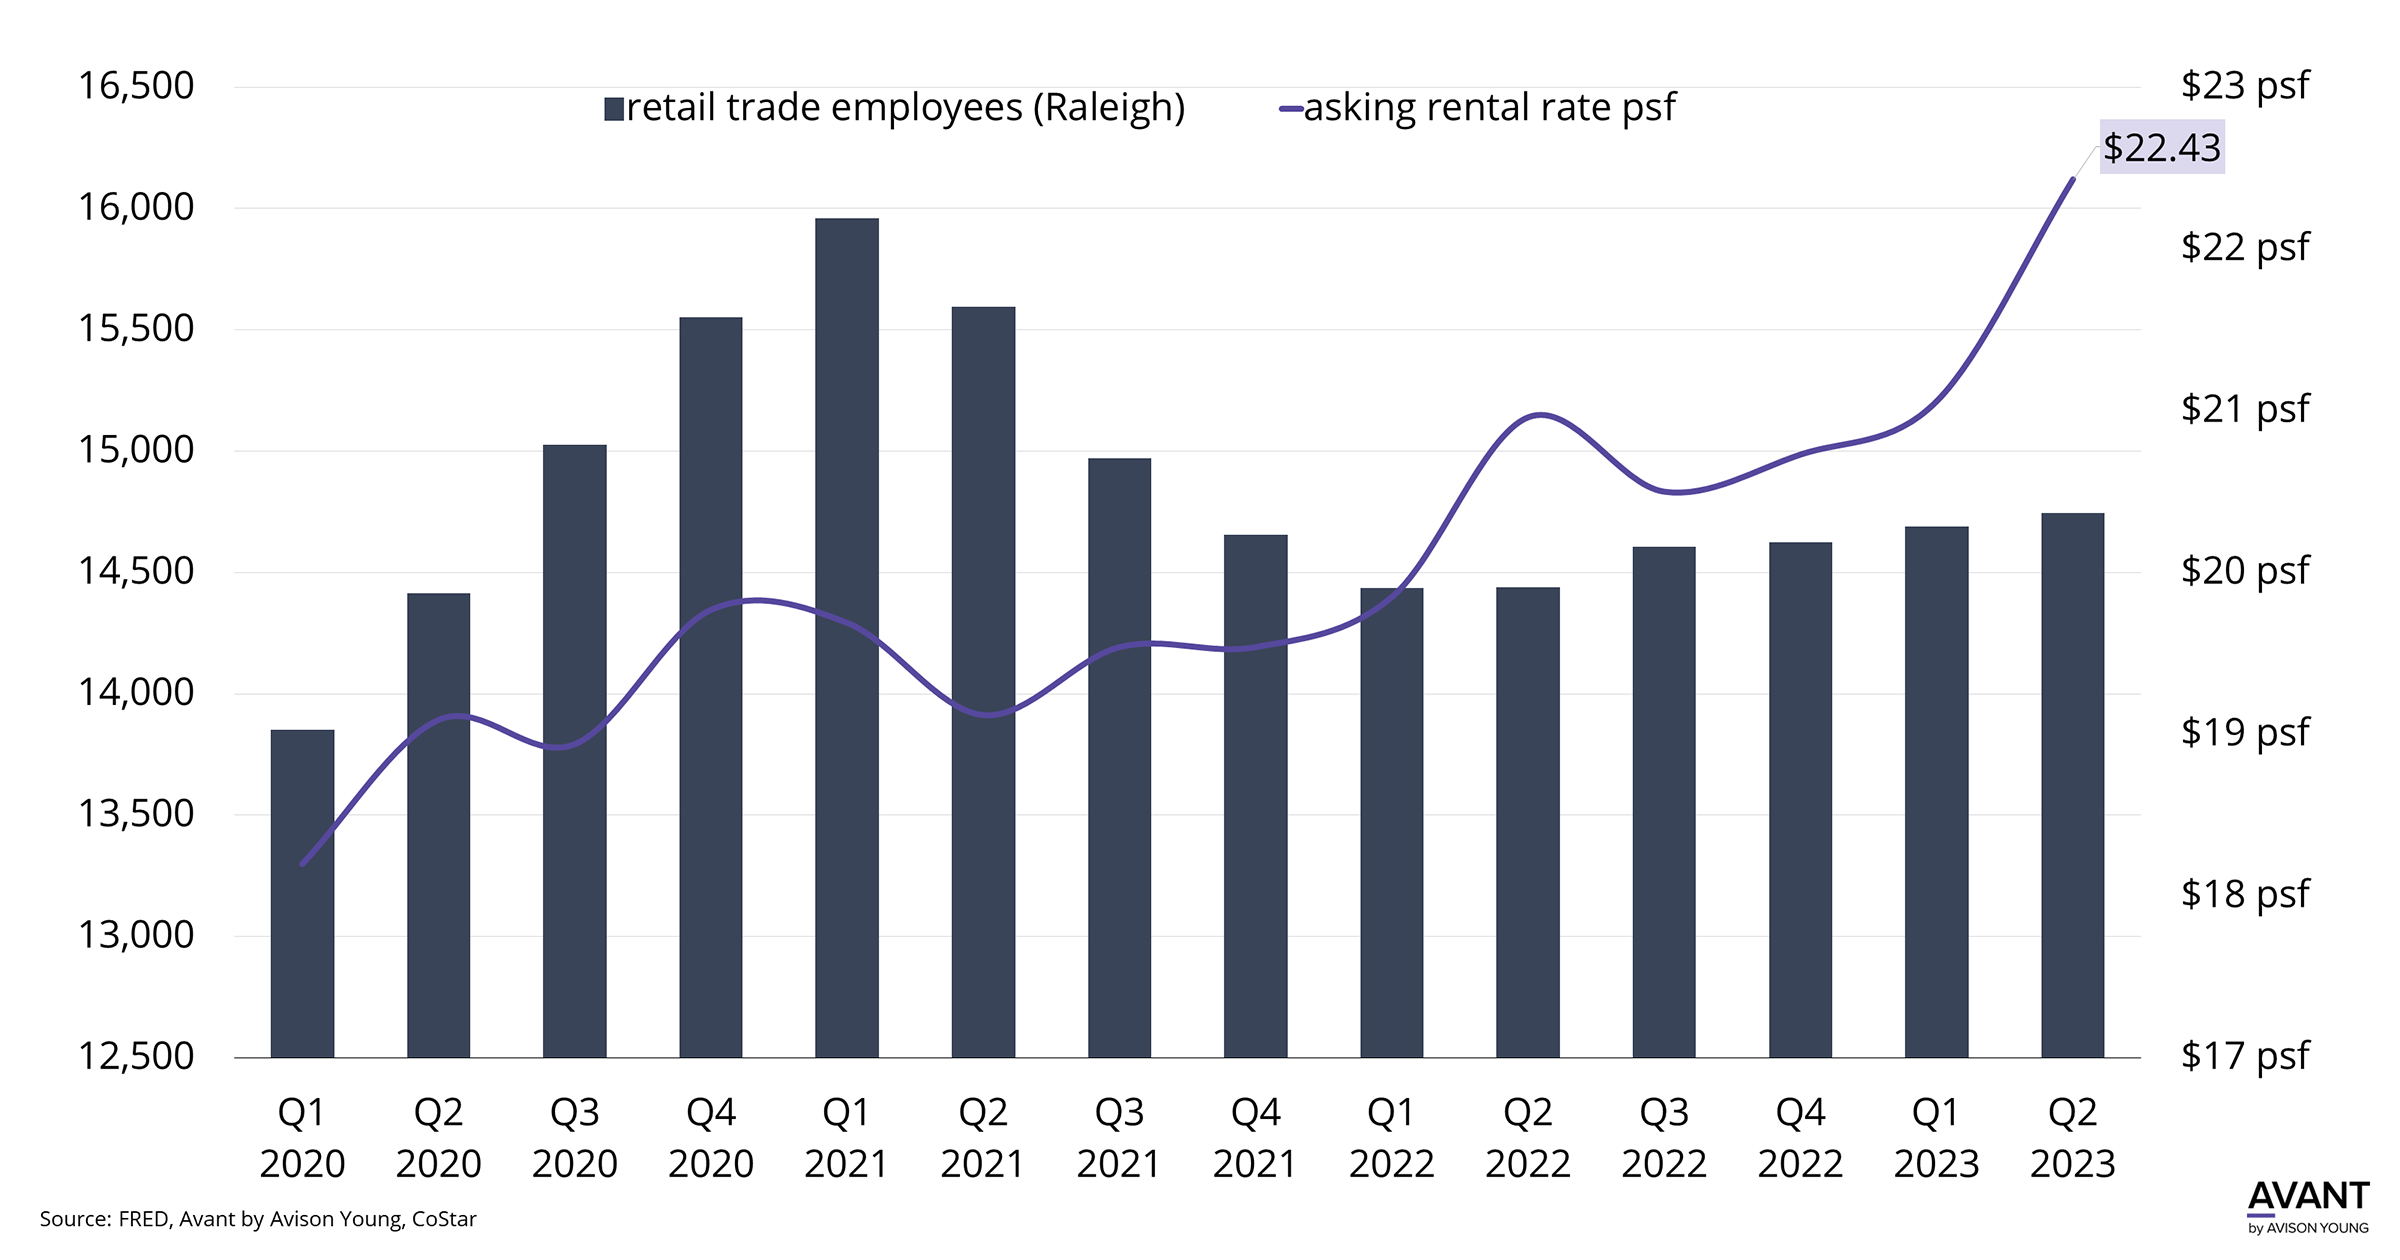 Graph of Raleigh retail space rental rates and retail employment from 2020 to 2023